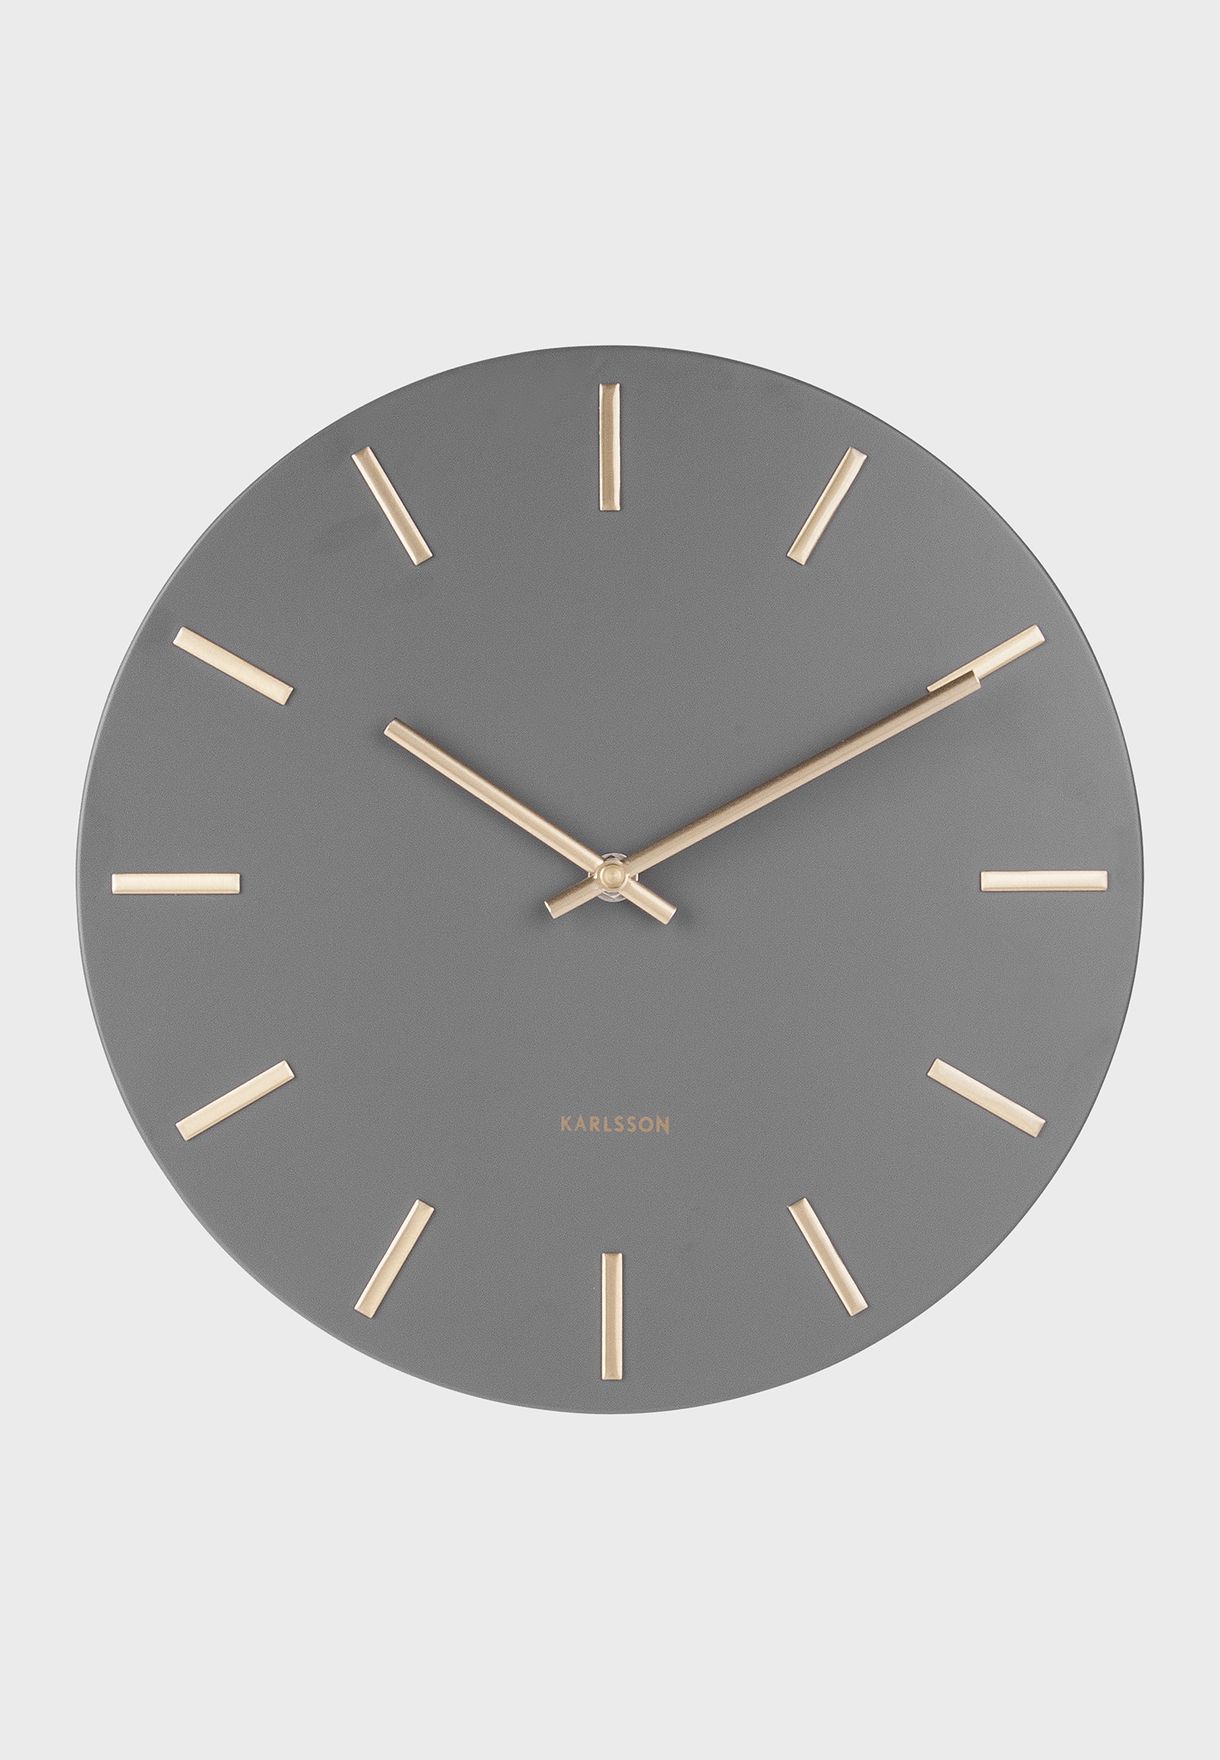 Grey & Gold Charm Wall Clock With Steel Battons